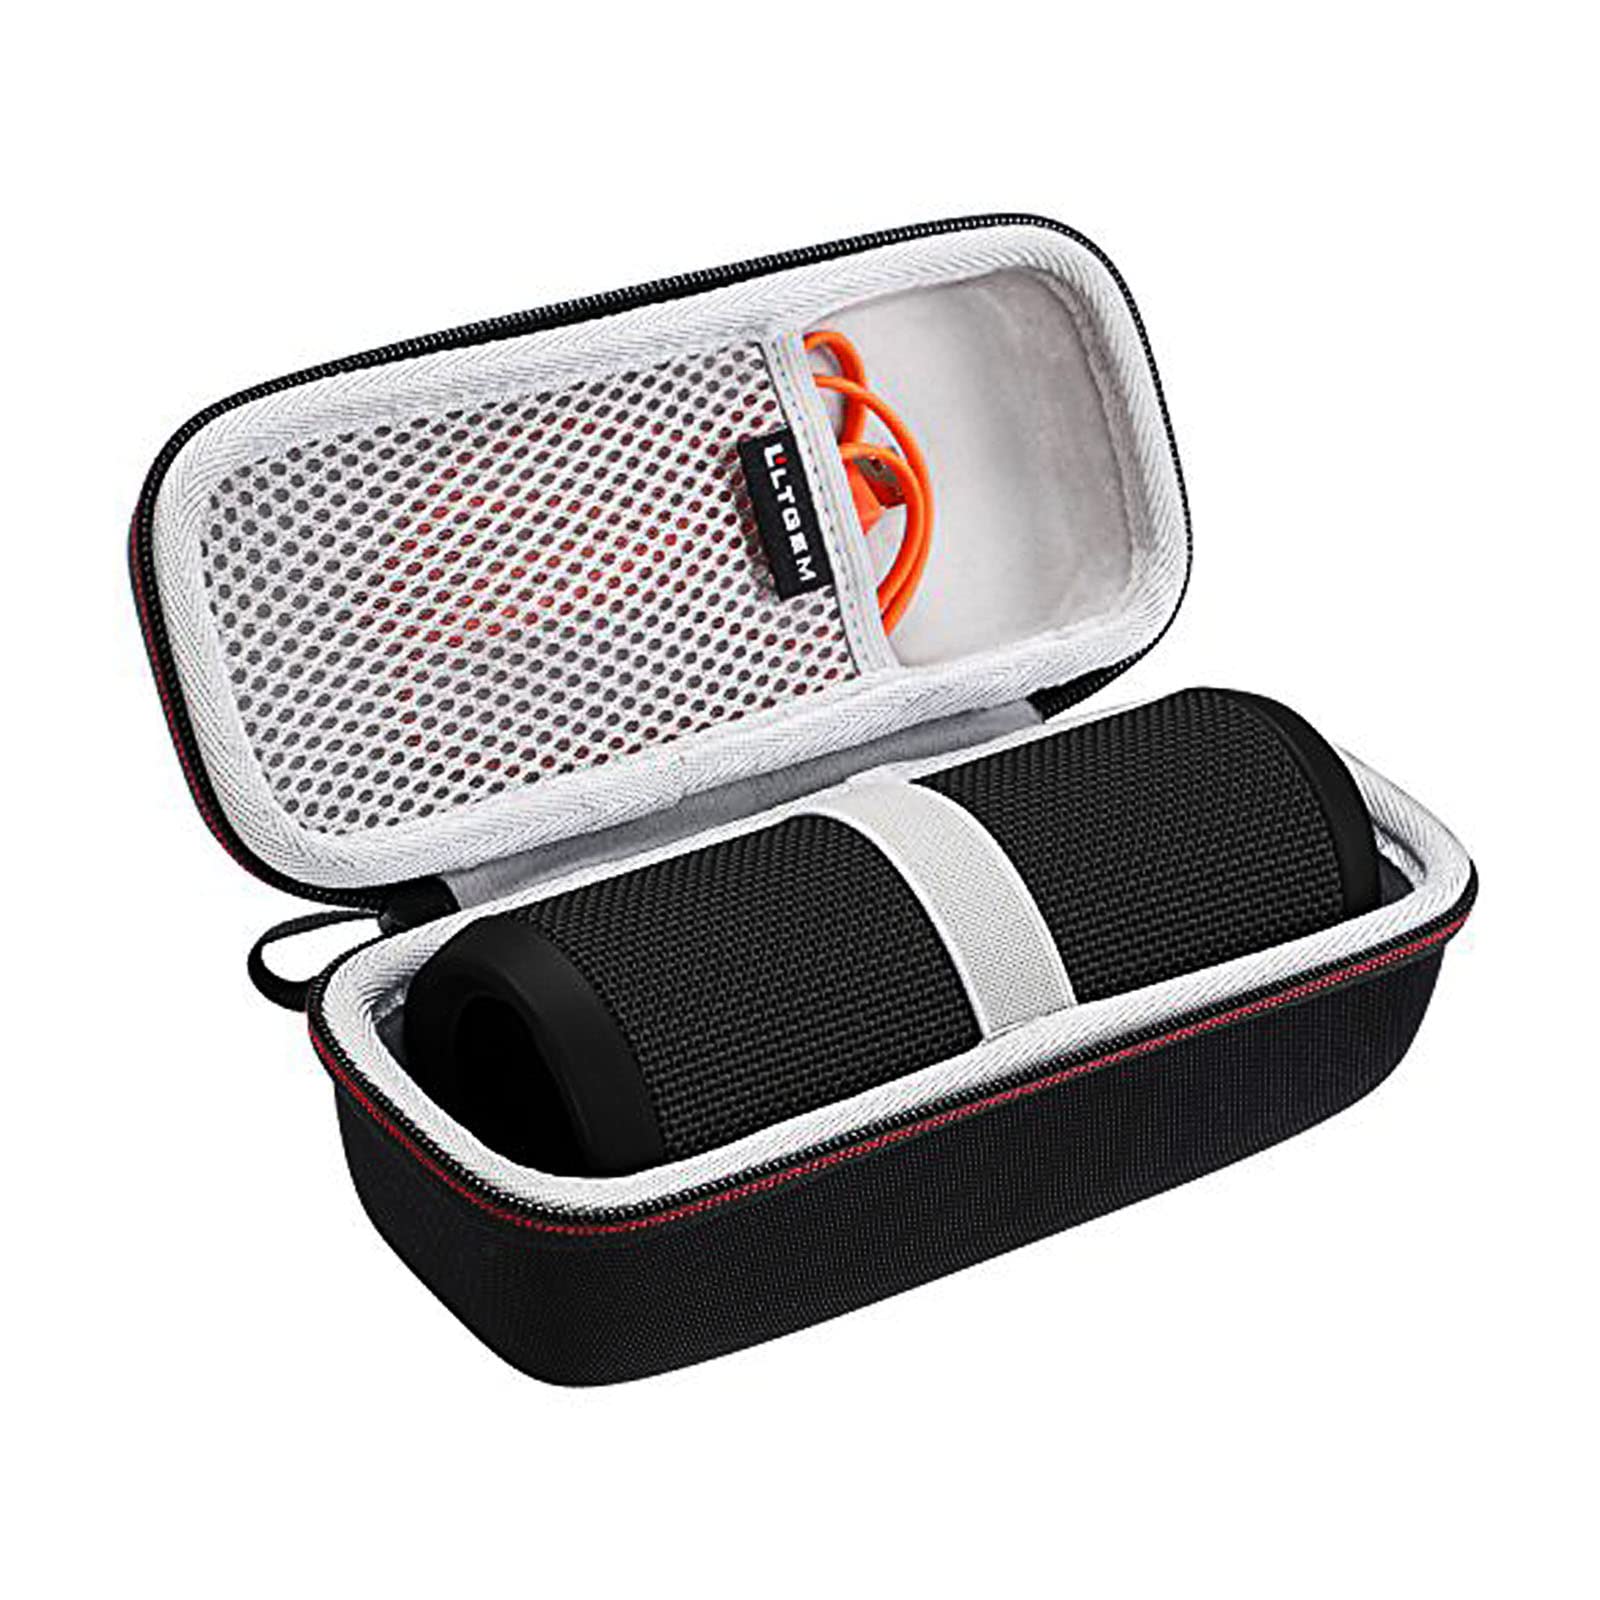 LTGEM Hard Carrying Case for JBL Flip 4/3 Portable Bluetooth Speaker, with Mesh Pocket Fits USB Cable and Accessories, for Travel, Storage and More